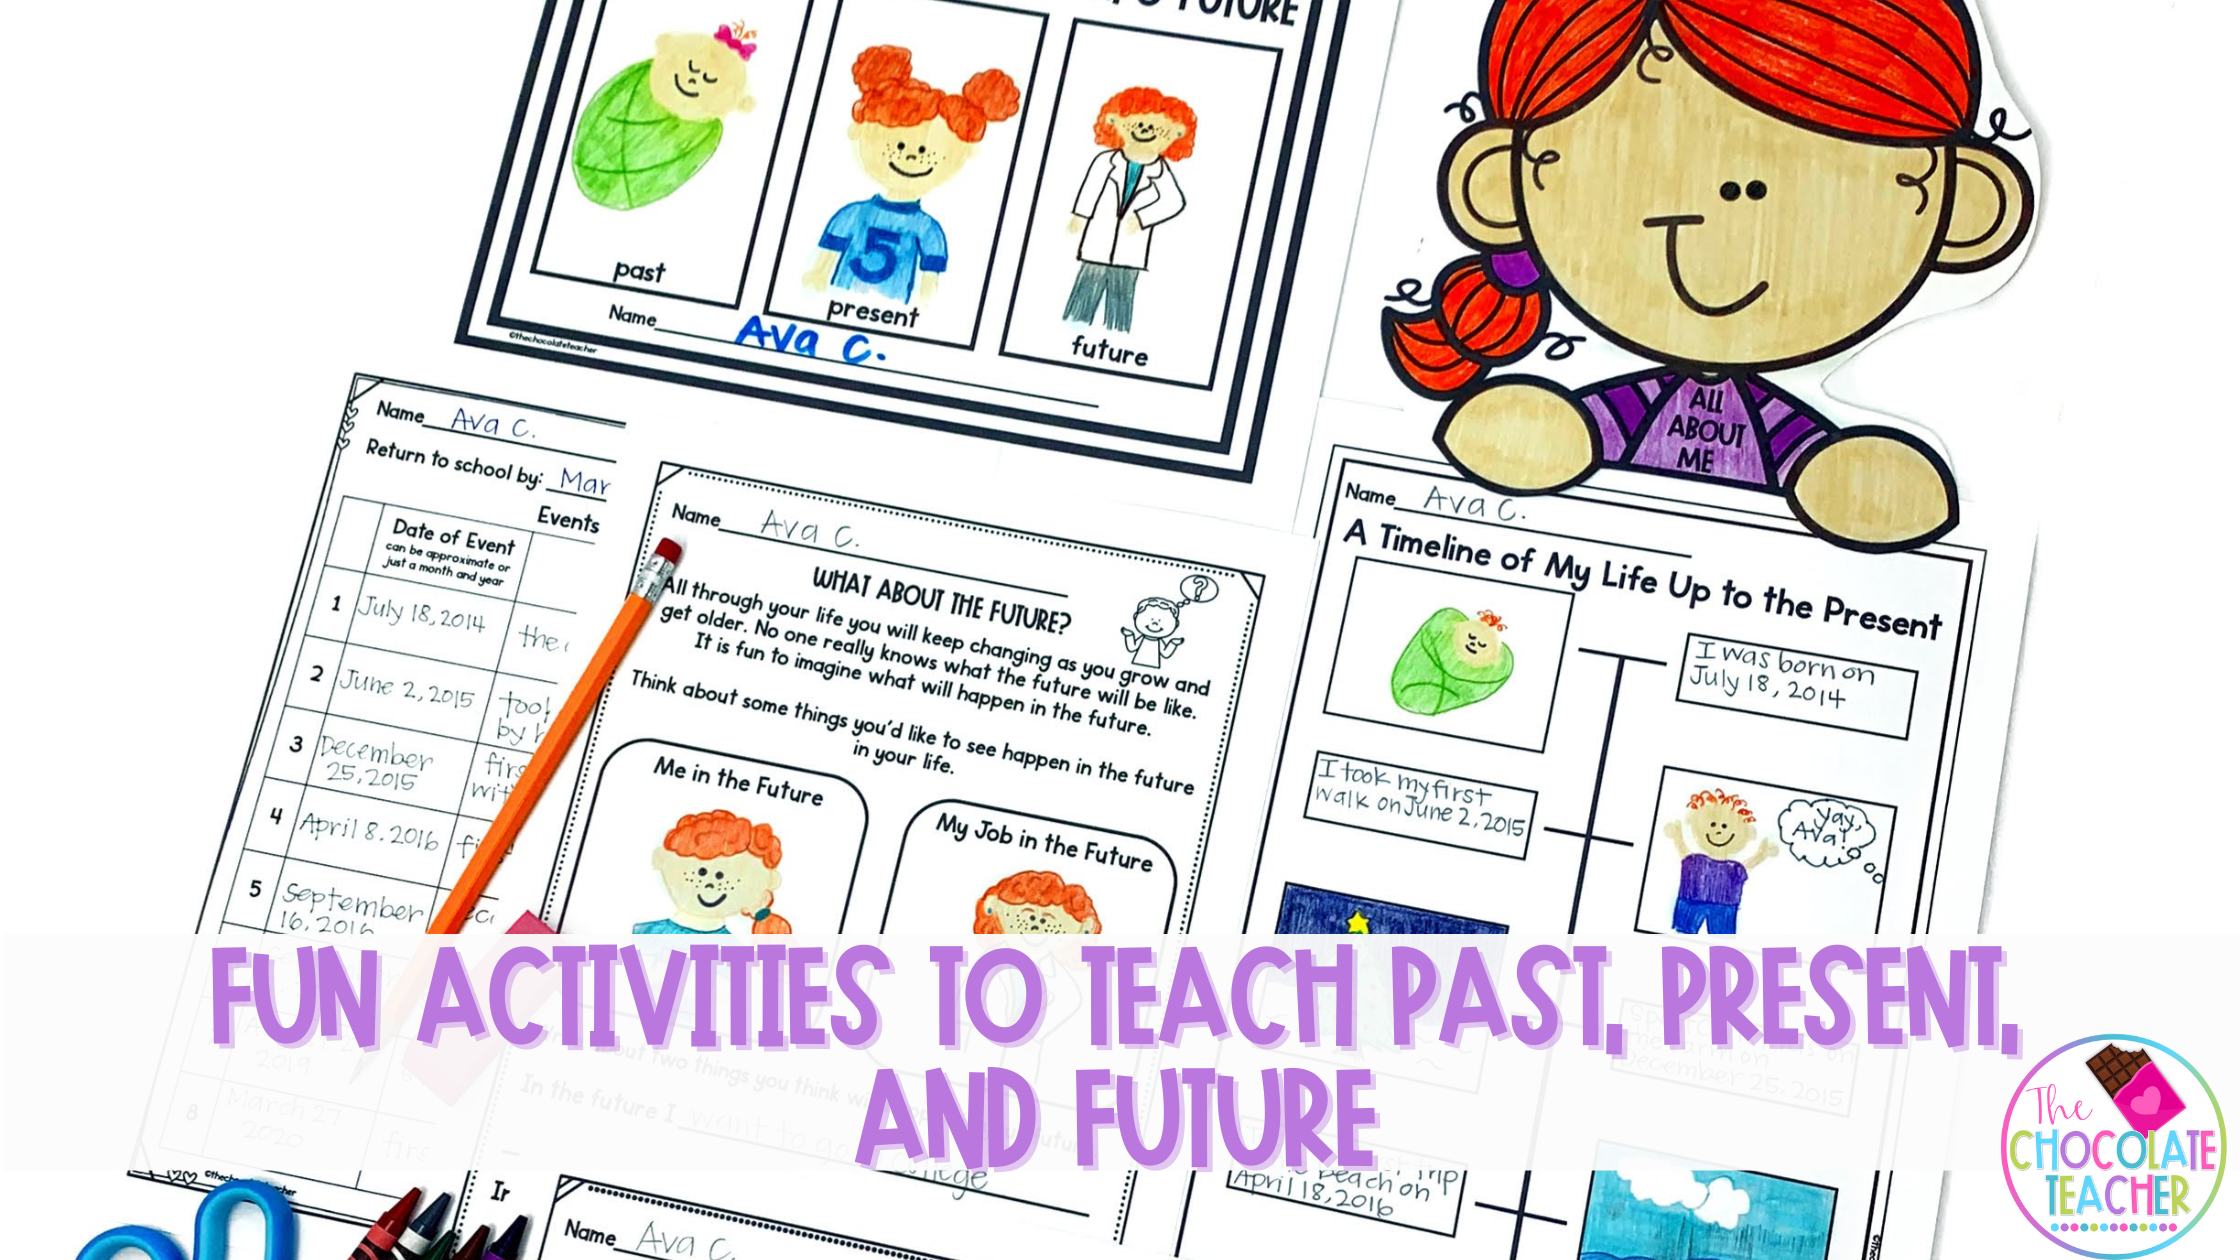 English Level 1 [Ages 5-6] Creativity Pack